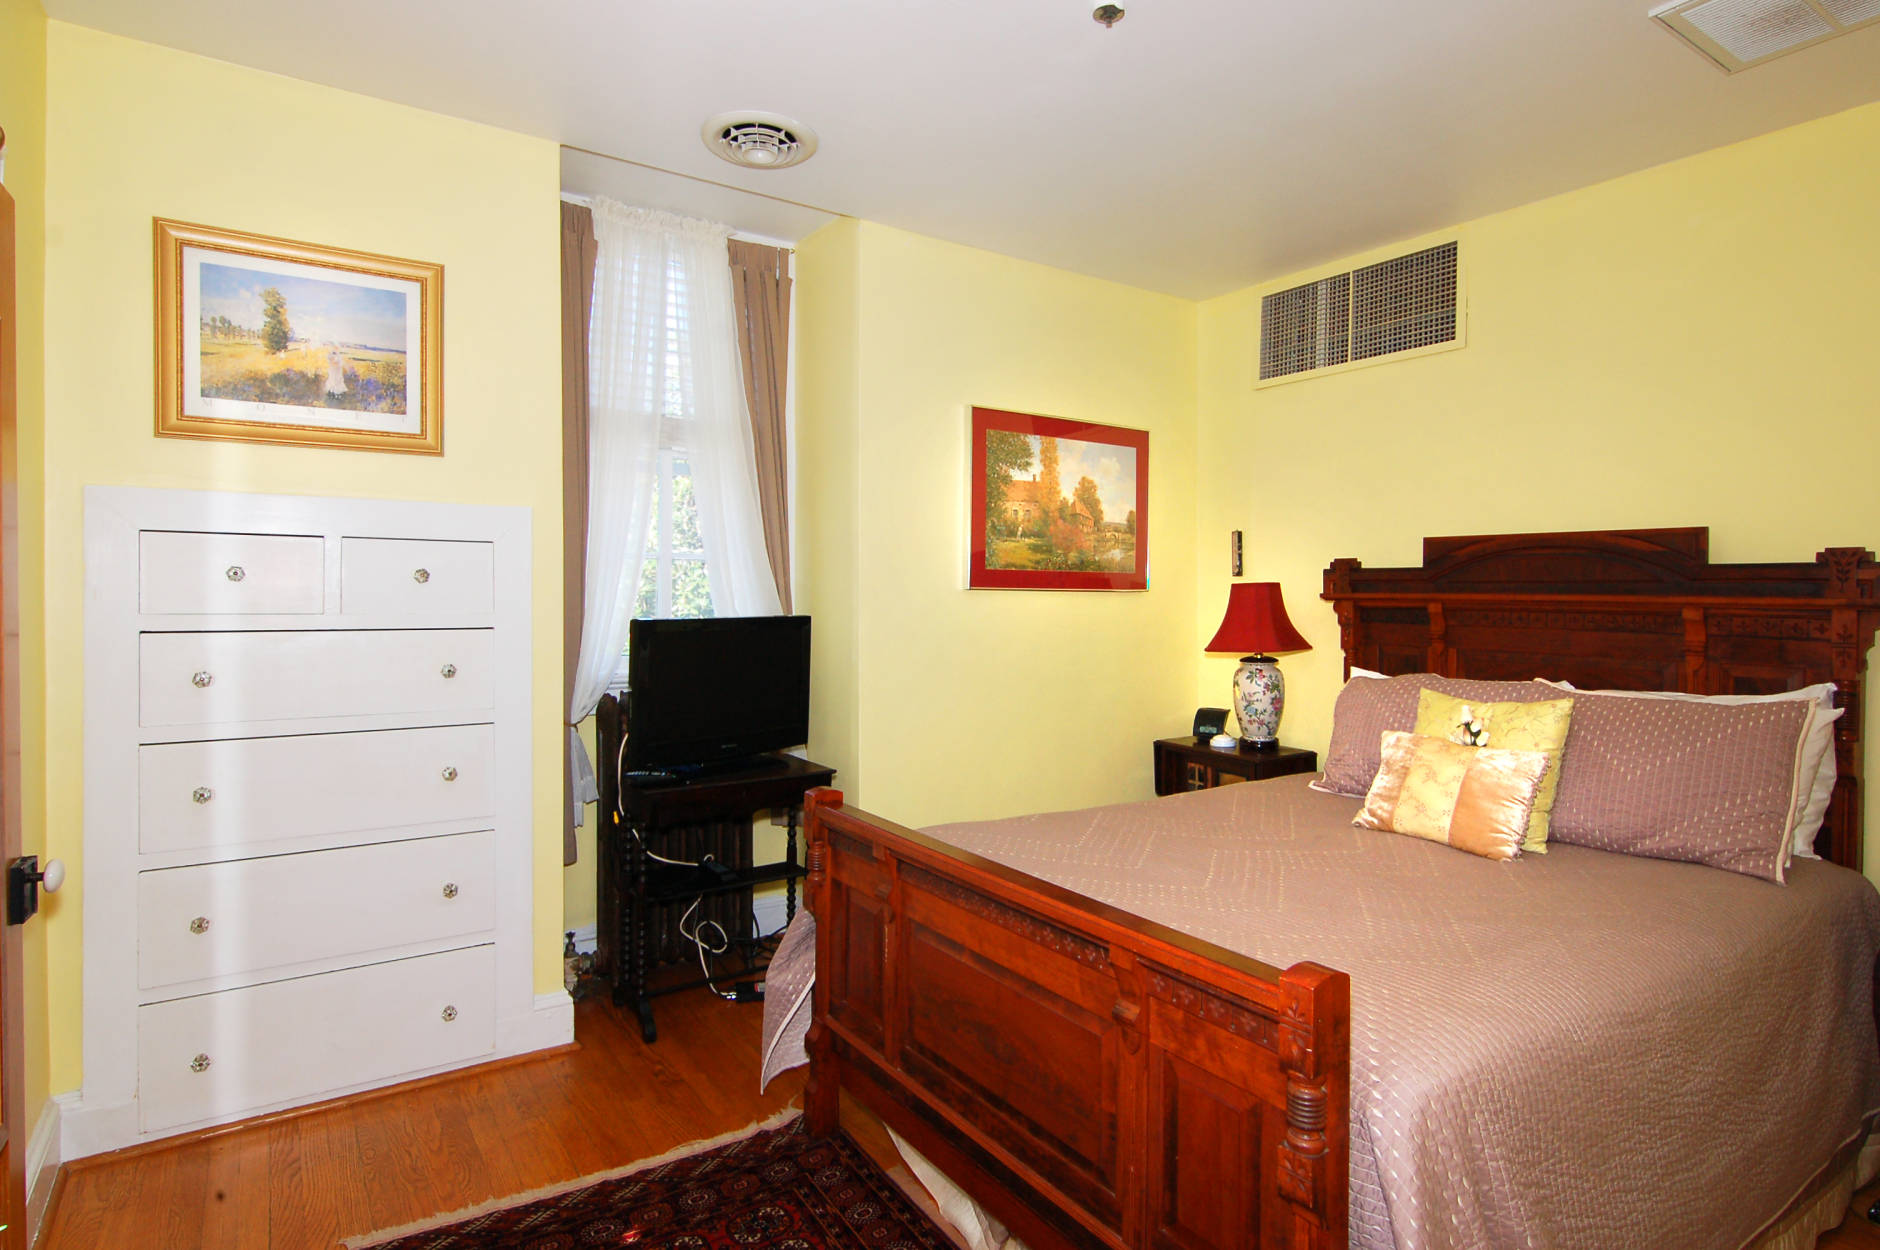 Aida's Victorian Inn is being sold fully furnished. (Courtesy Chesapeake Pro Photo)